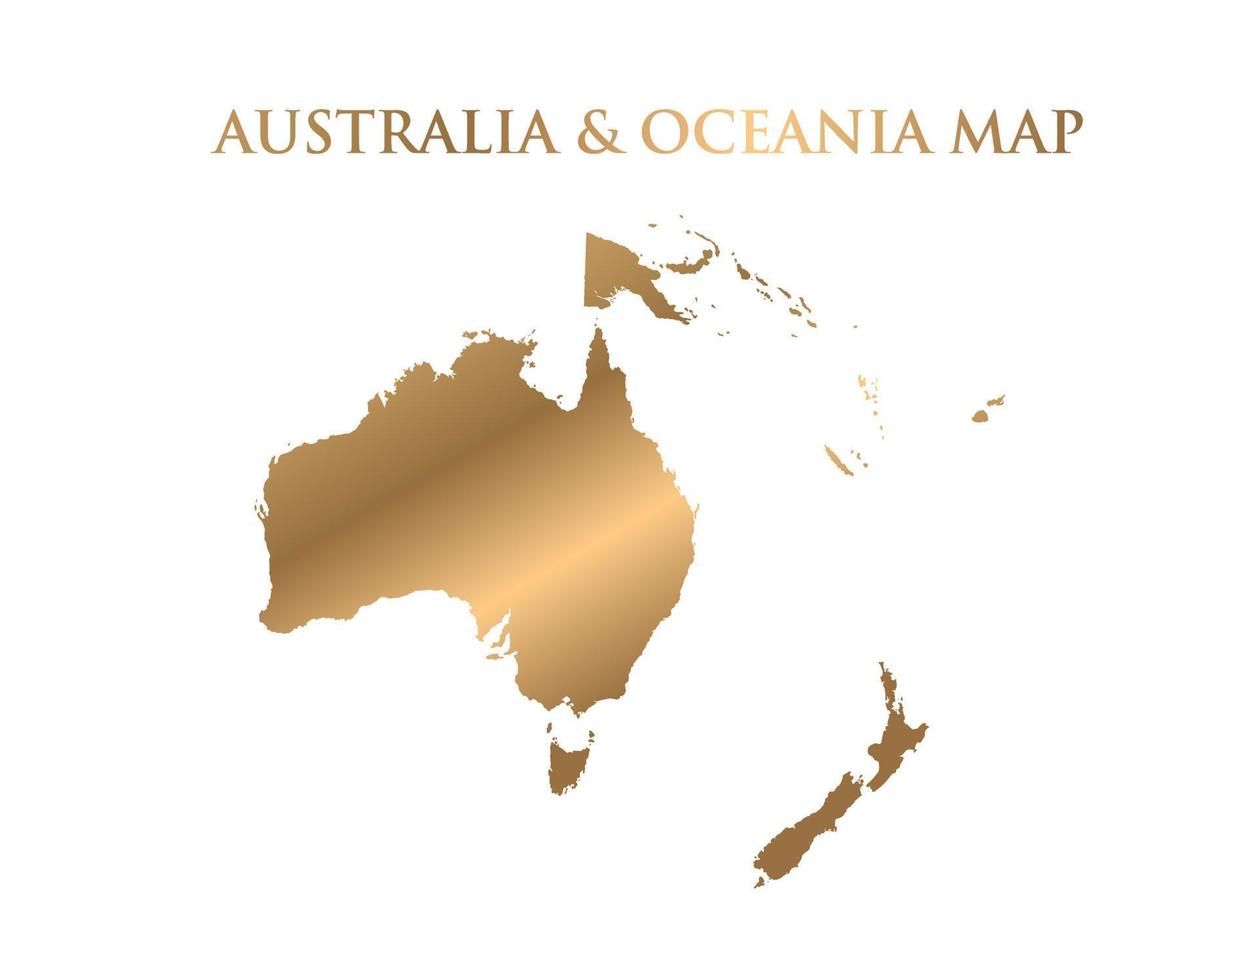 Gold australia and oceania map High Detailed on white background. Abstract design vector illustration